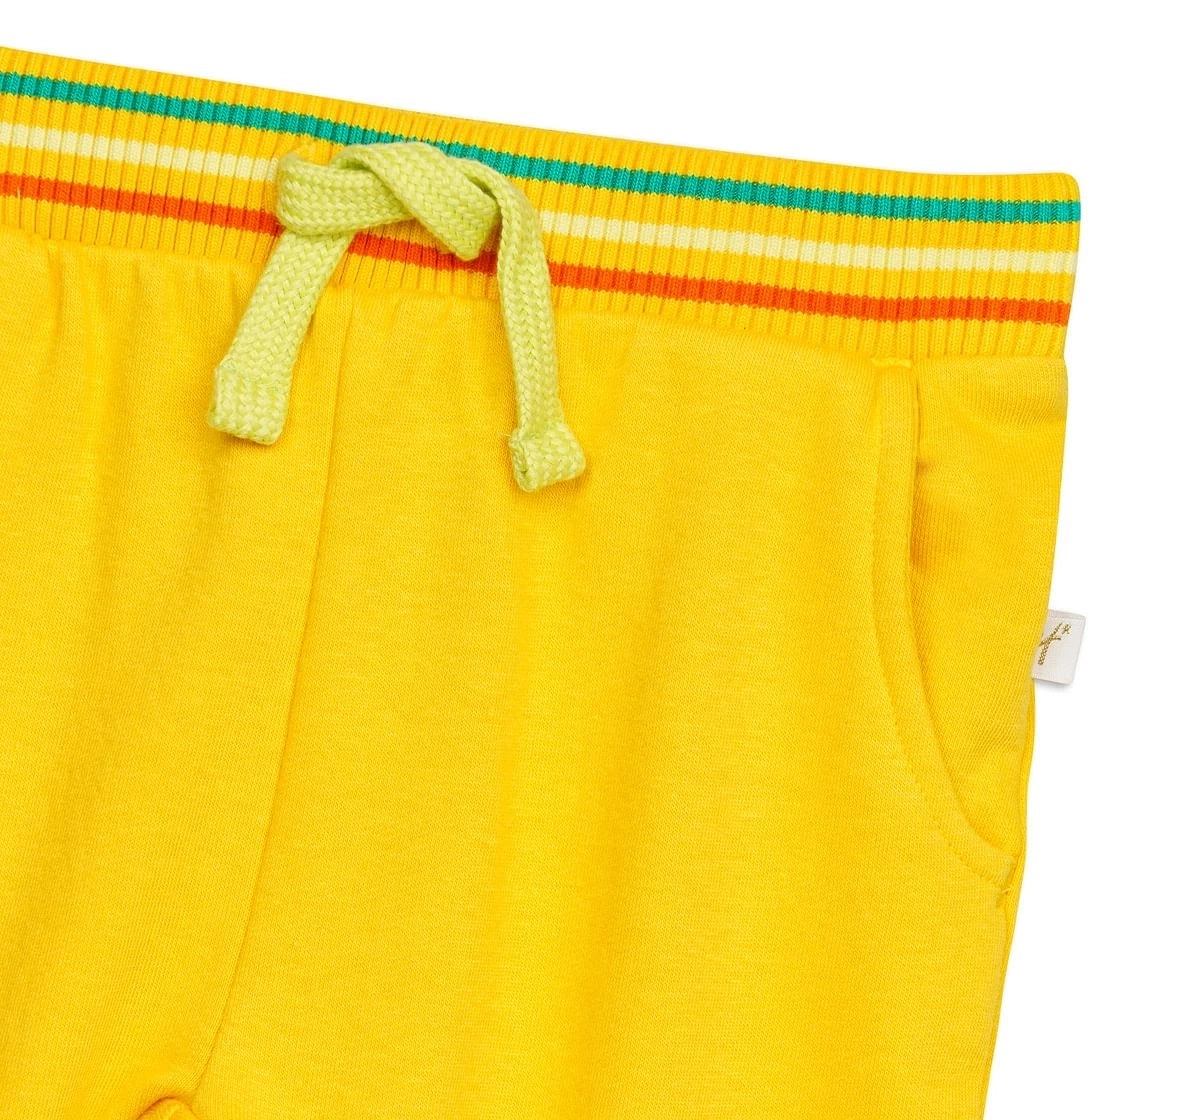 H by Hamleys Boys  Joggers -Pack of 1-Yellow